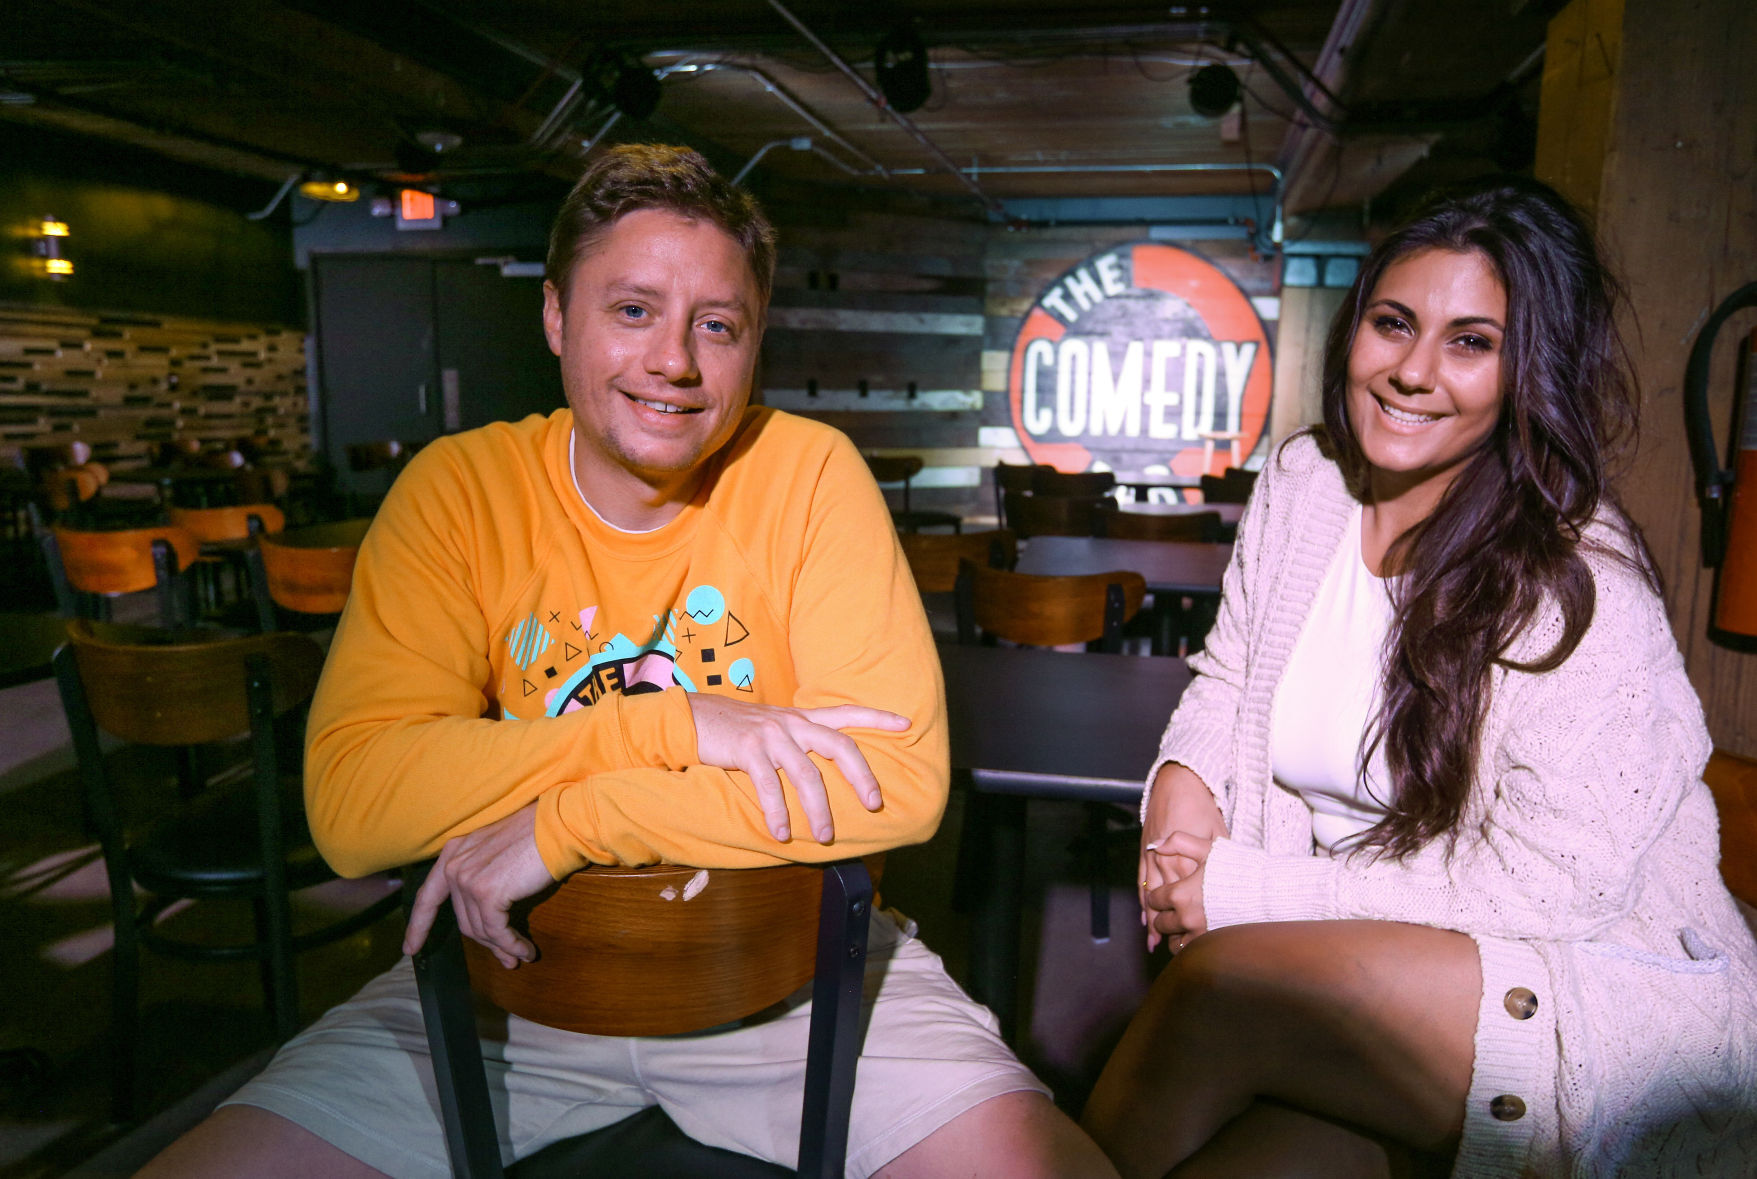 Kyle Lane and Sahar Chavoshi, co-owners of The Comedy Bar, will reopen their business Oct. 1.    PHOTO CREDIT: Dave Kettering